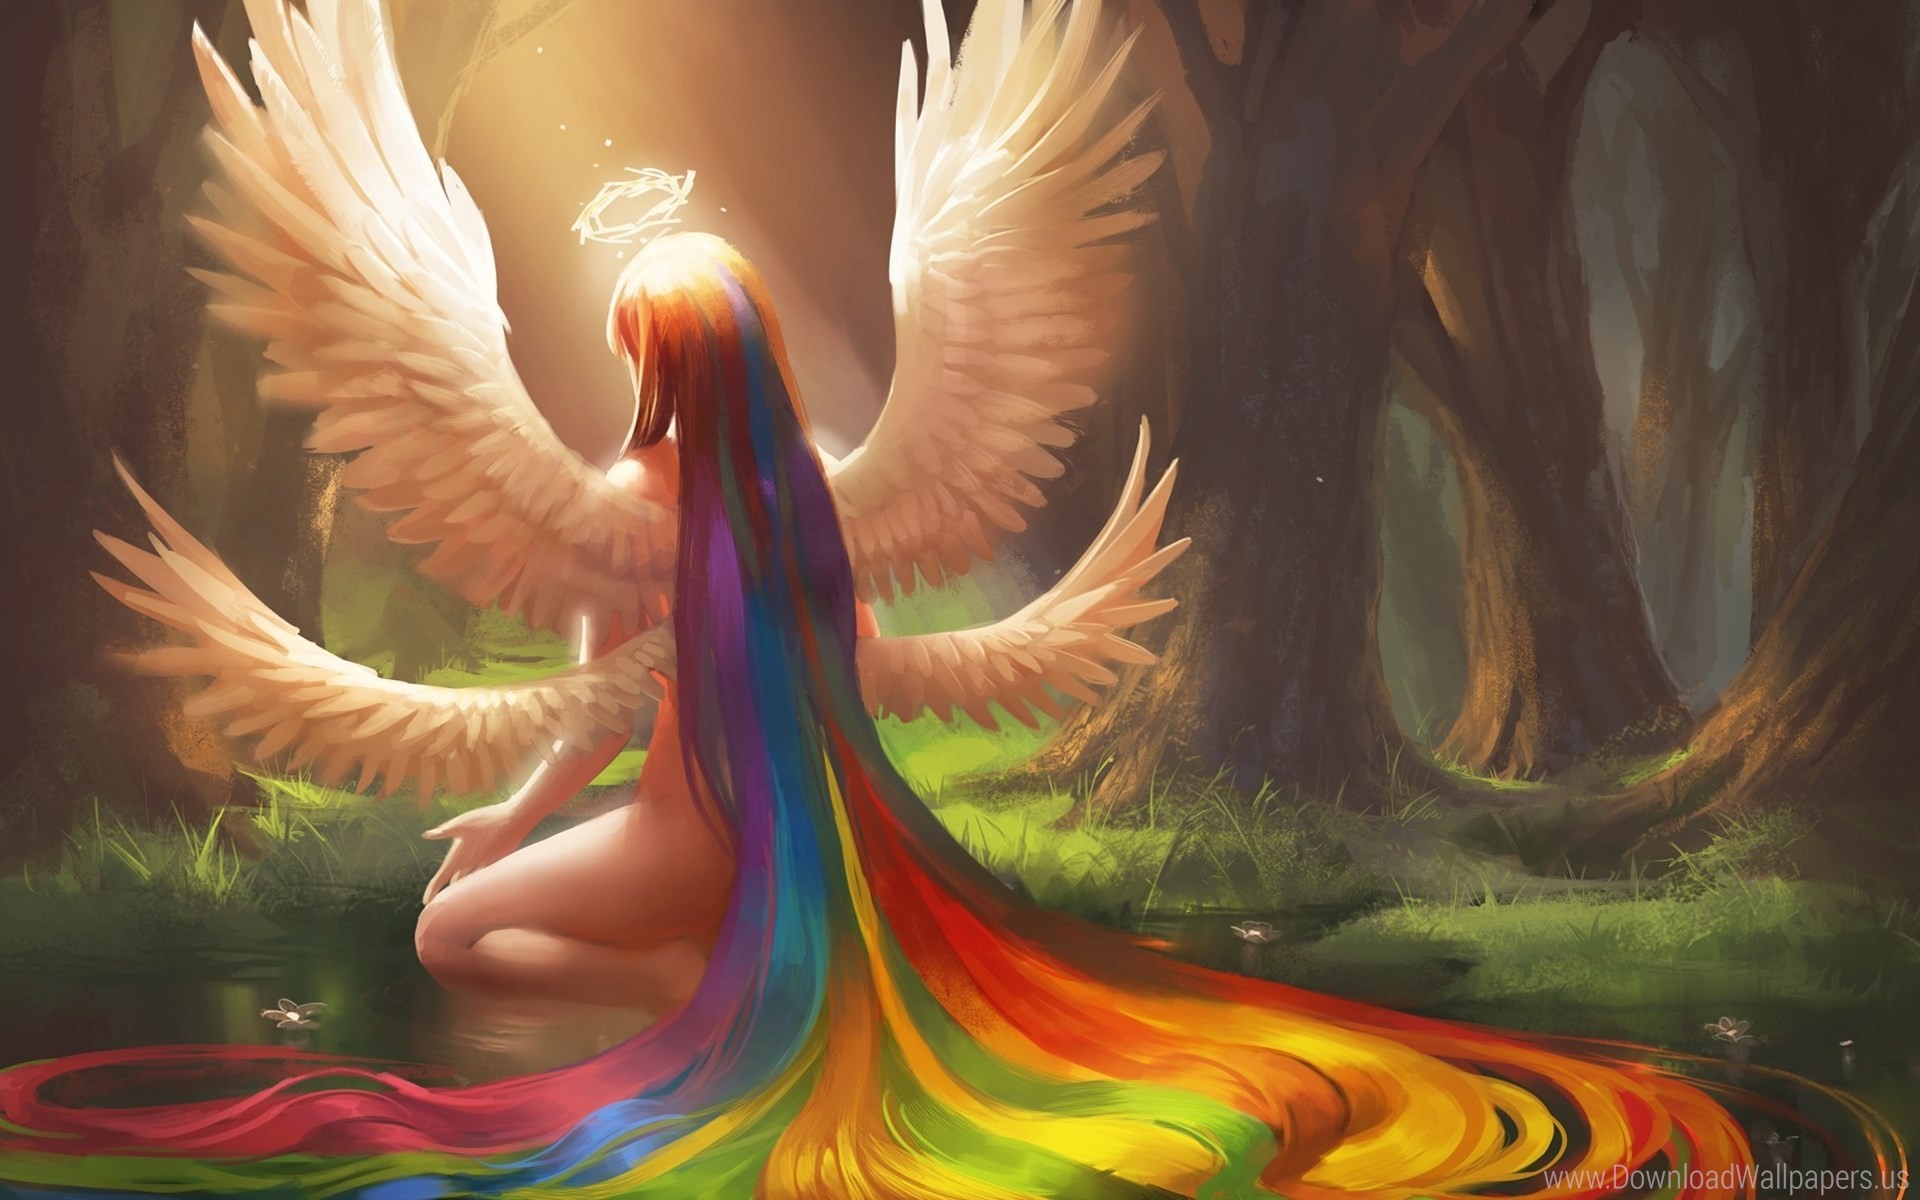 1920x1200 Download Widescreen 16:10  - Angel Halo, Art, Flowers, Forest,  Girl, Hair, Pond, Rainbow, Sakimichan, Water, Wings Wallpaper